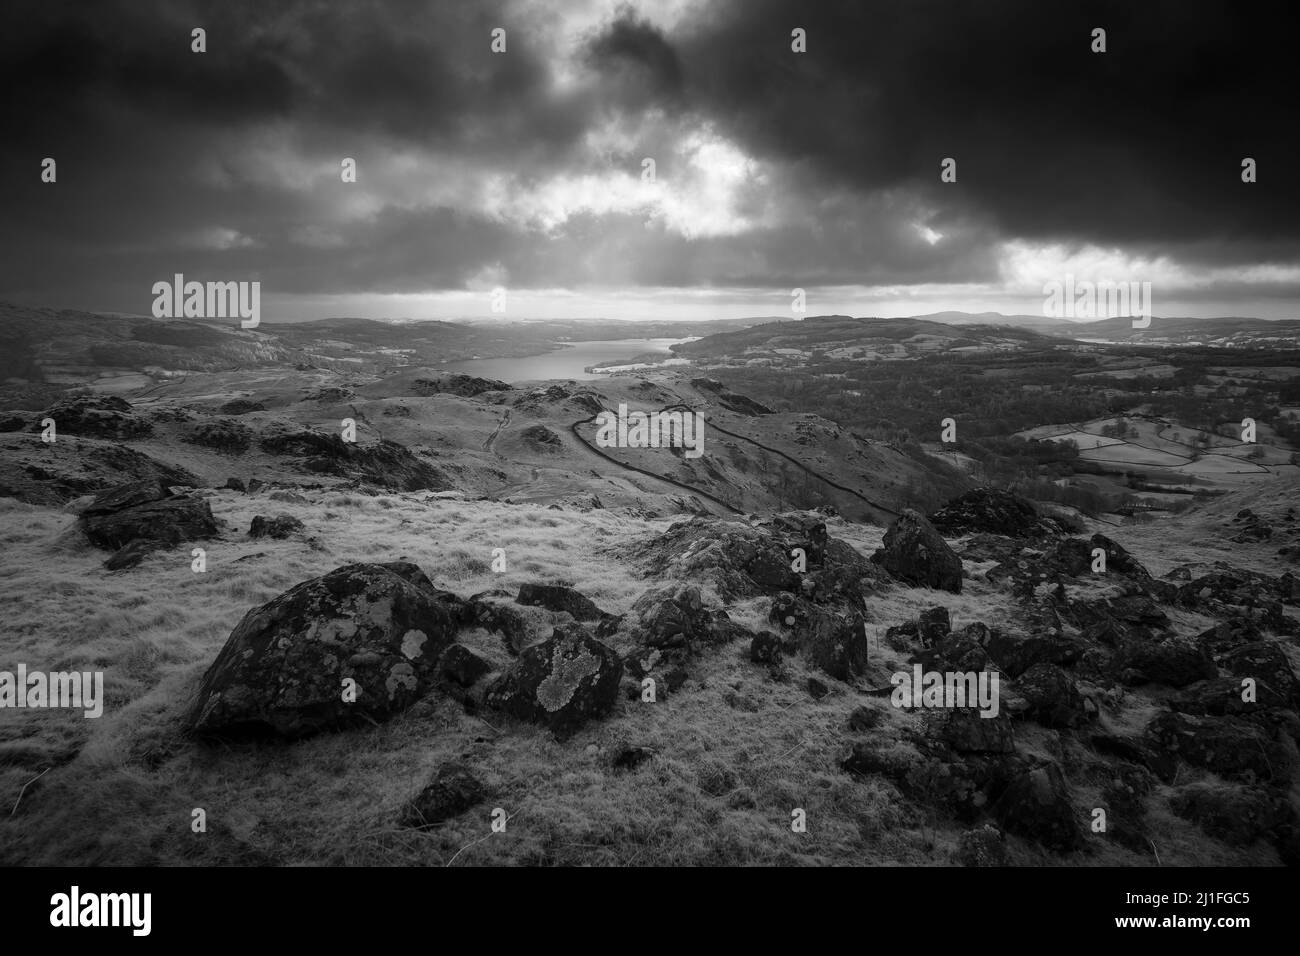 A black and white image of Loughrigg Fell with lake Windermere beyond ...